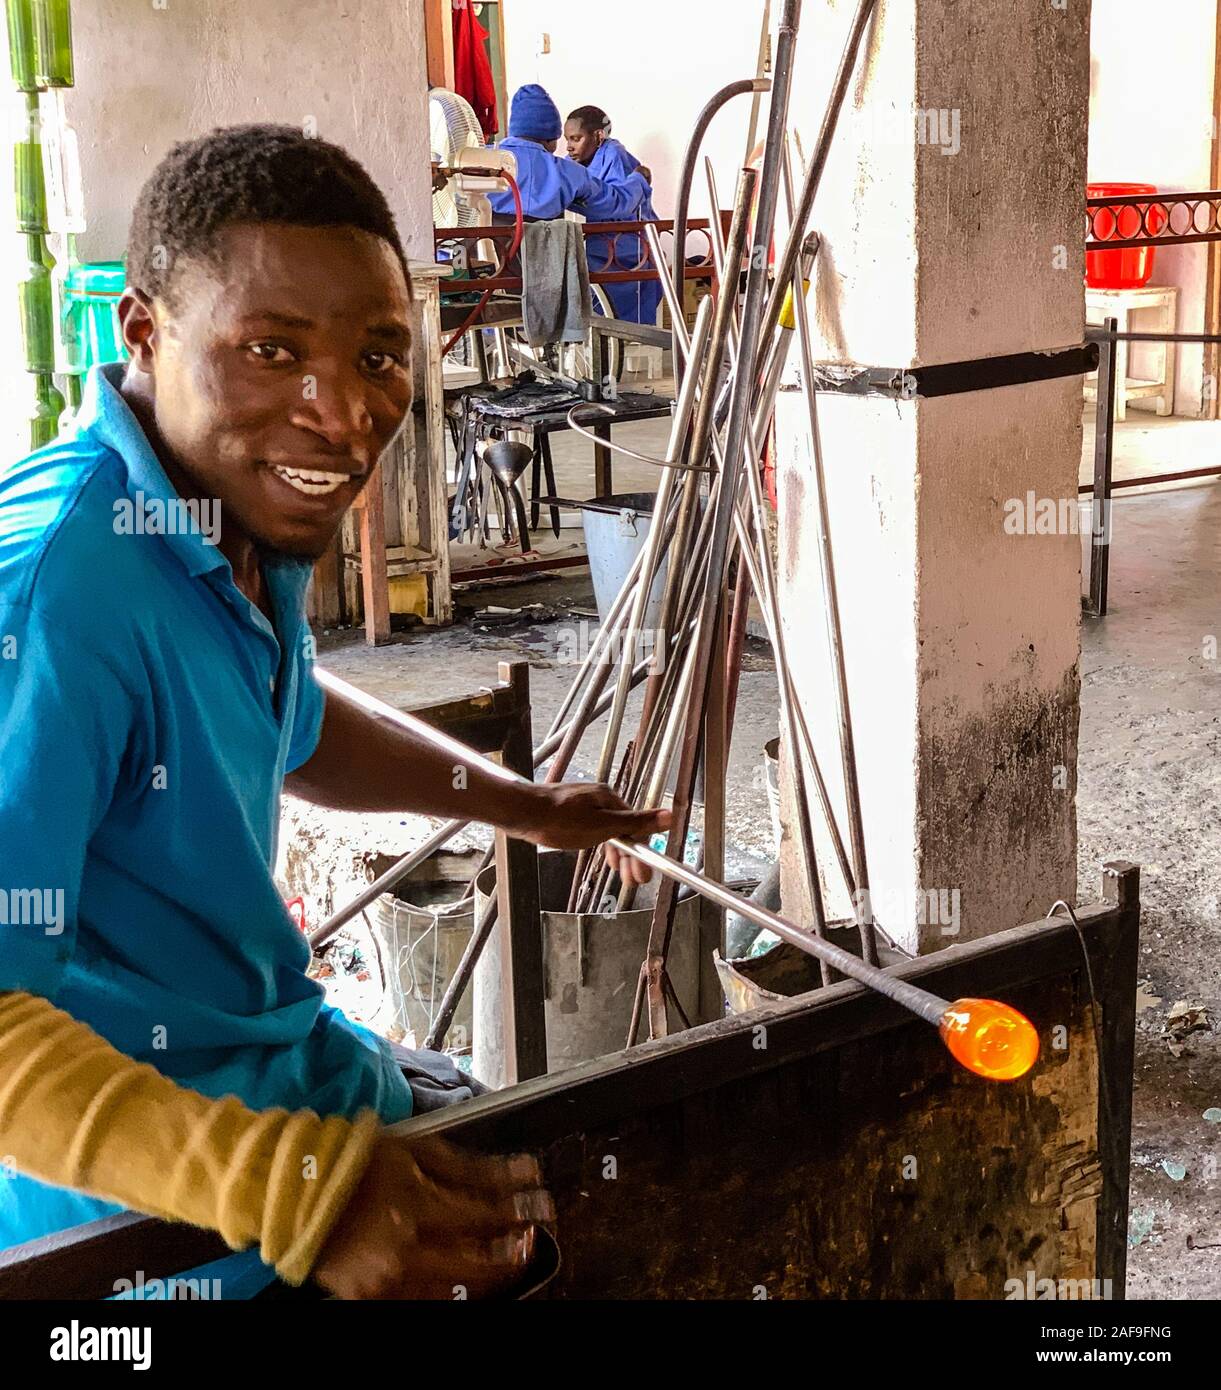 Tanzania.  Arusha.  Handicapped Worker Shaping Molten Glass for Glassware at Shanga, a Handicraft Center Employing the Handicapped. Stock Photo